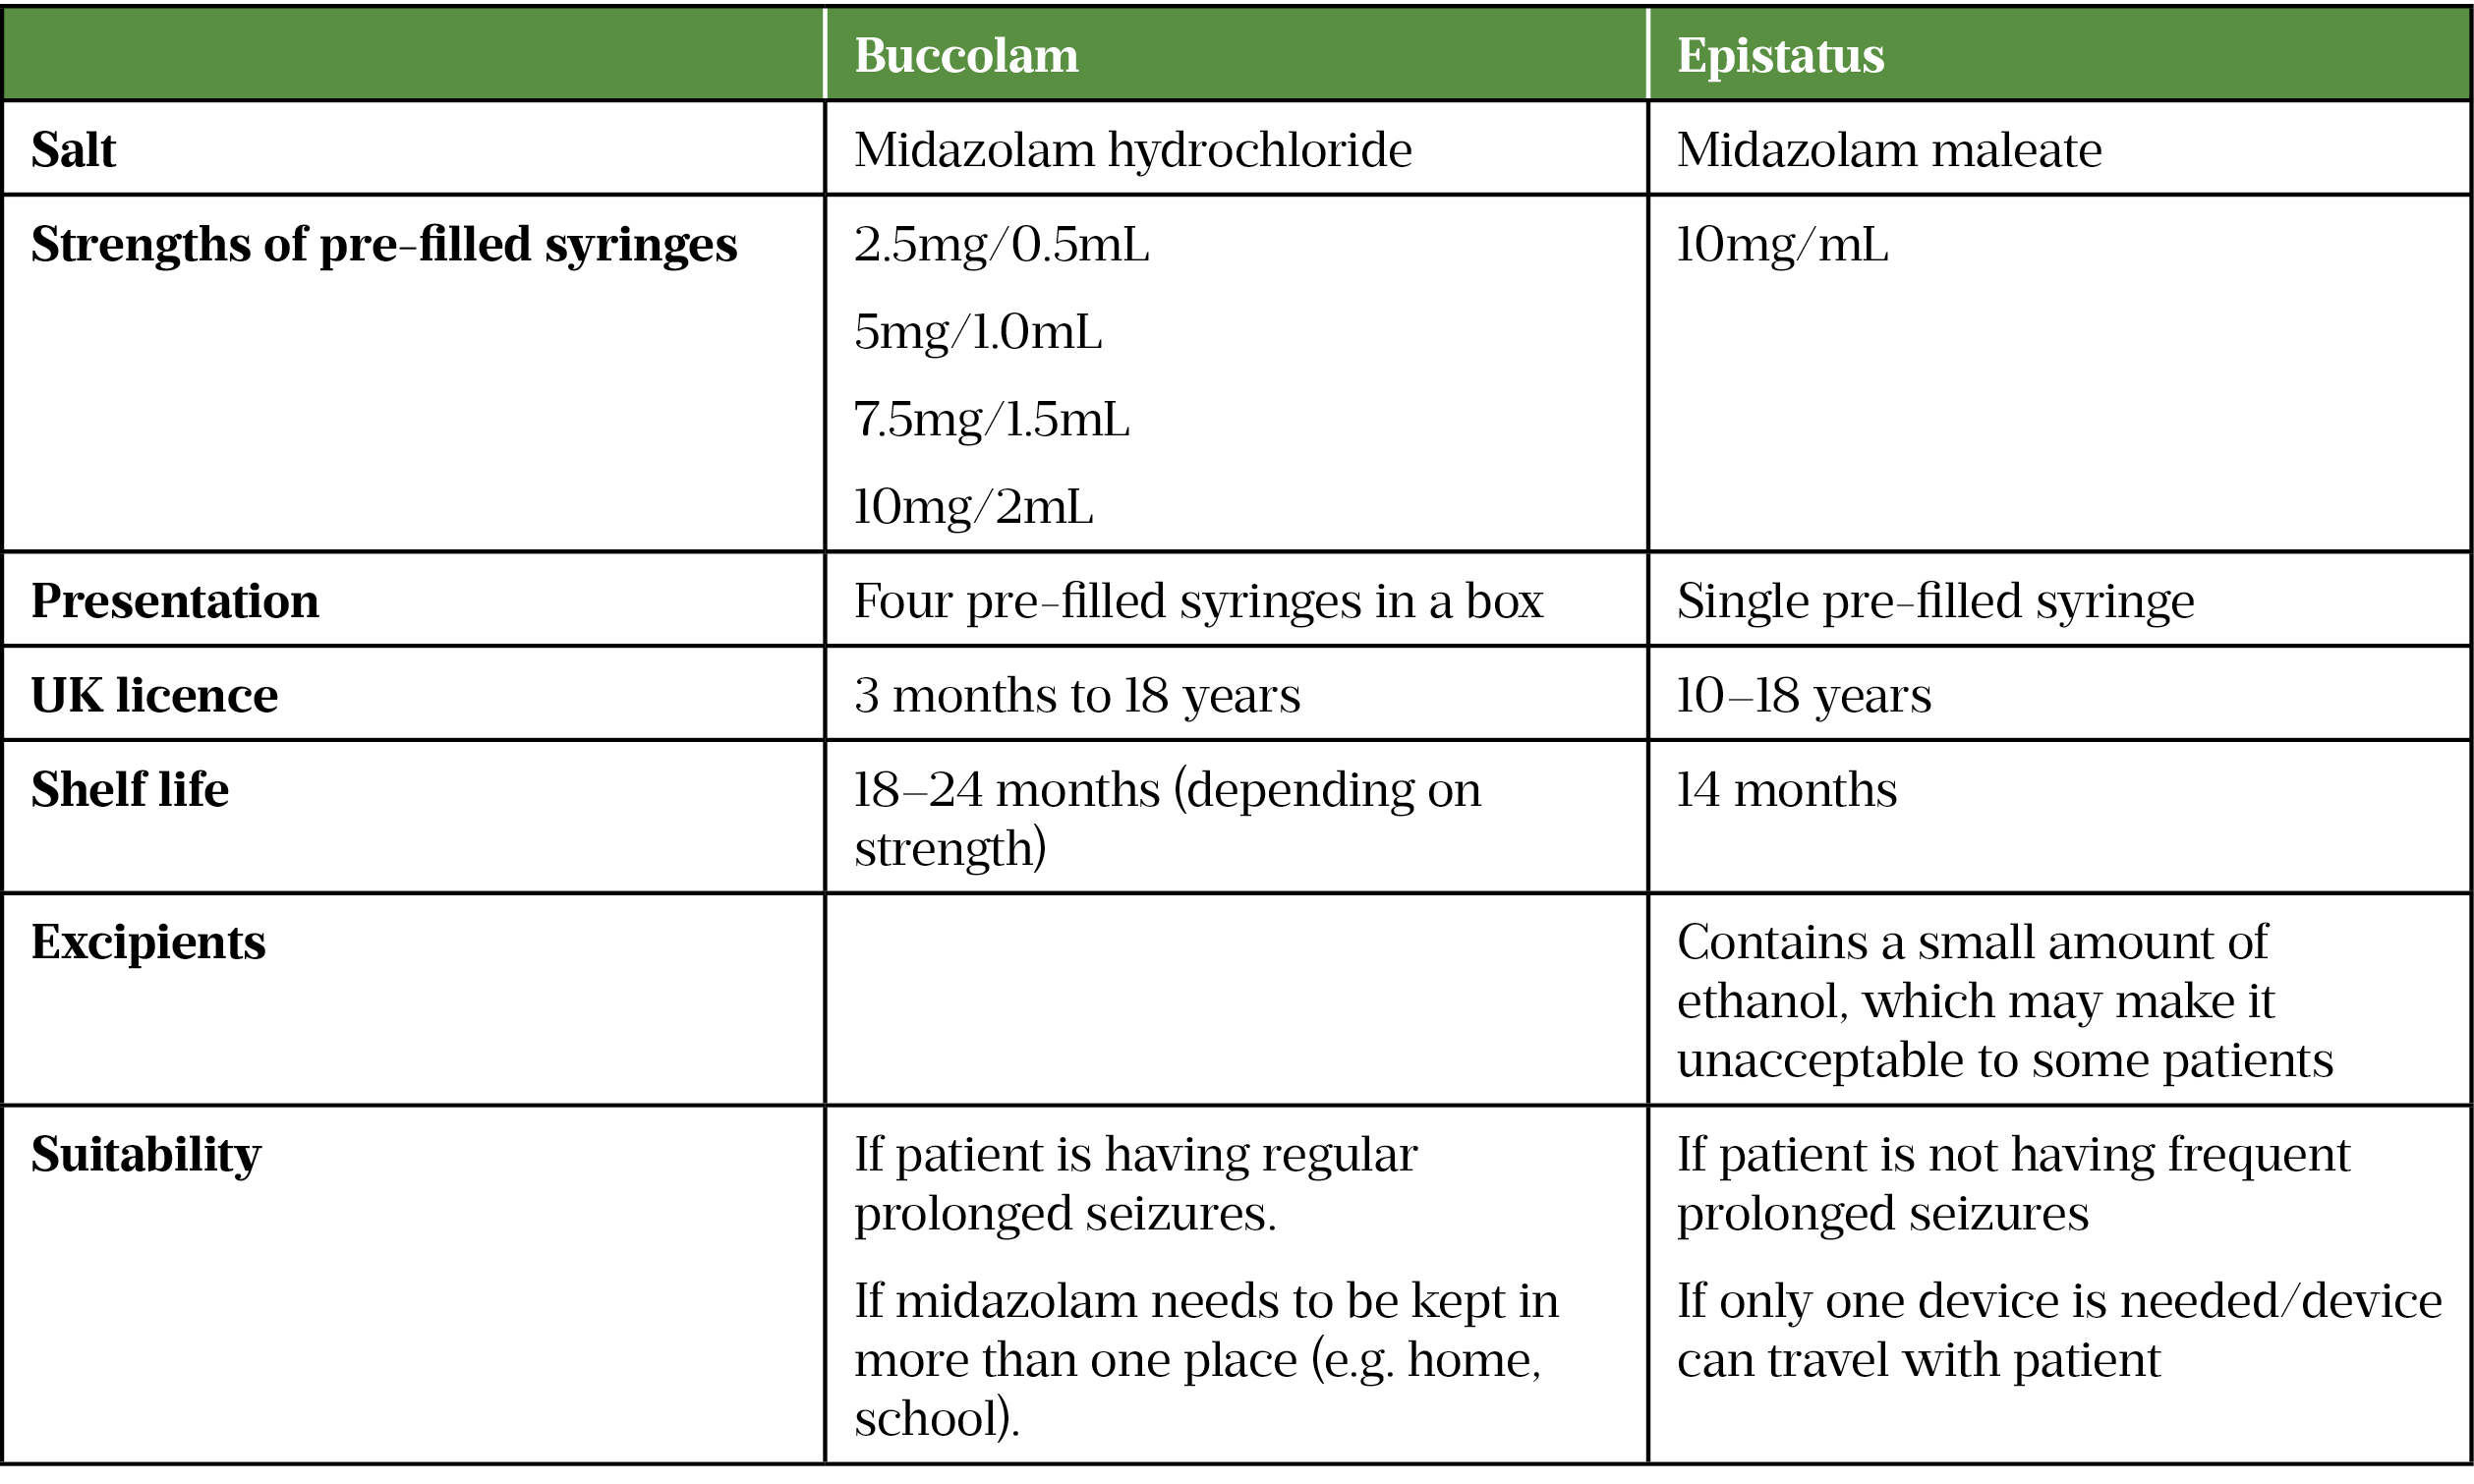 Table 2 Buccal midazolam: comparison of UK licensed products